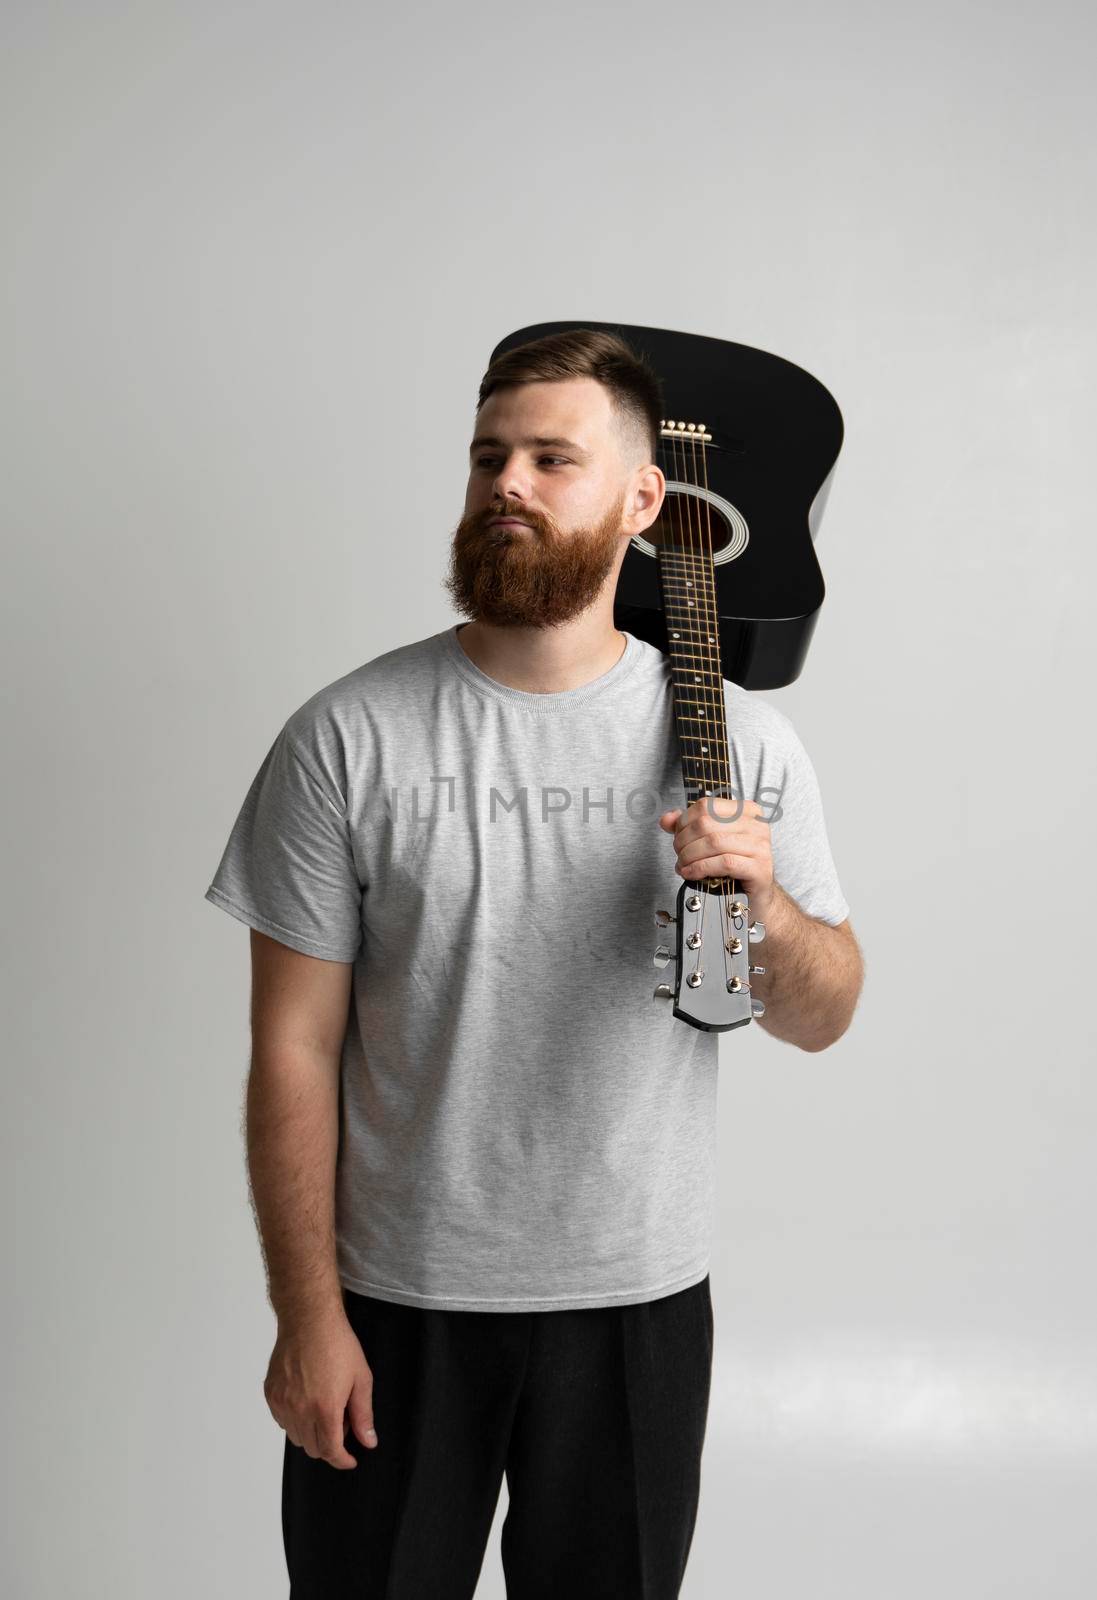 Handsome brunette bearded man musician standing and holding a acoustic guitar on a shoulder on a white background studio